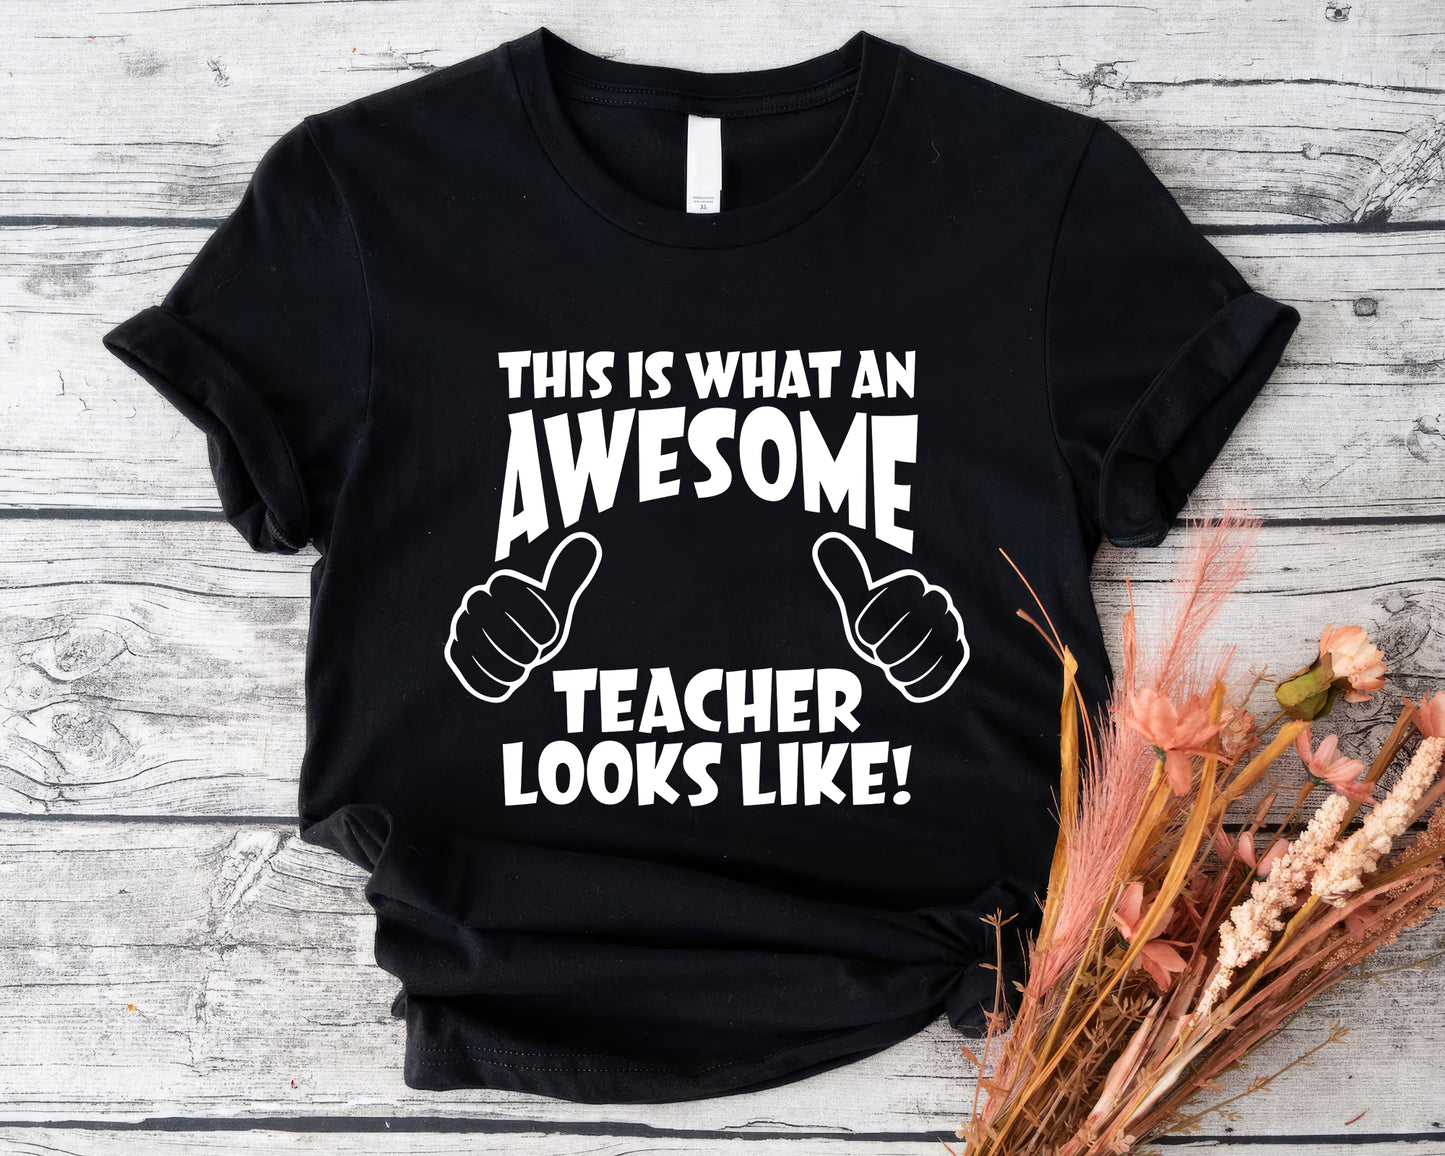 This Is An Awesome Teacher Looks Like Personalized Tee | Back To School Customized T-shirts | Funny Quote Teacher T-shirt - Black